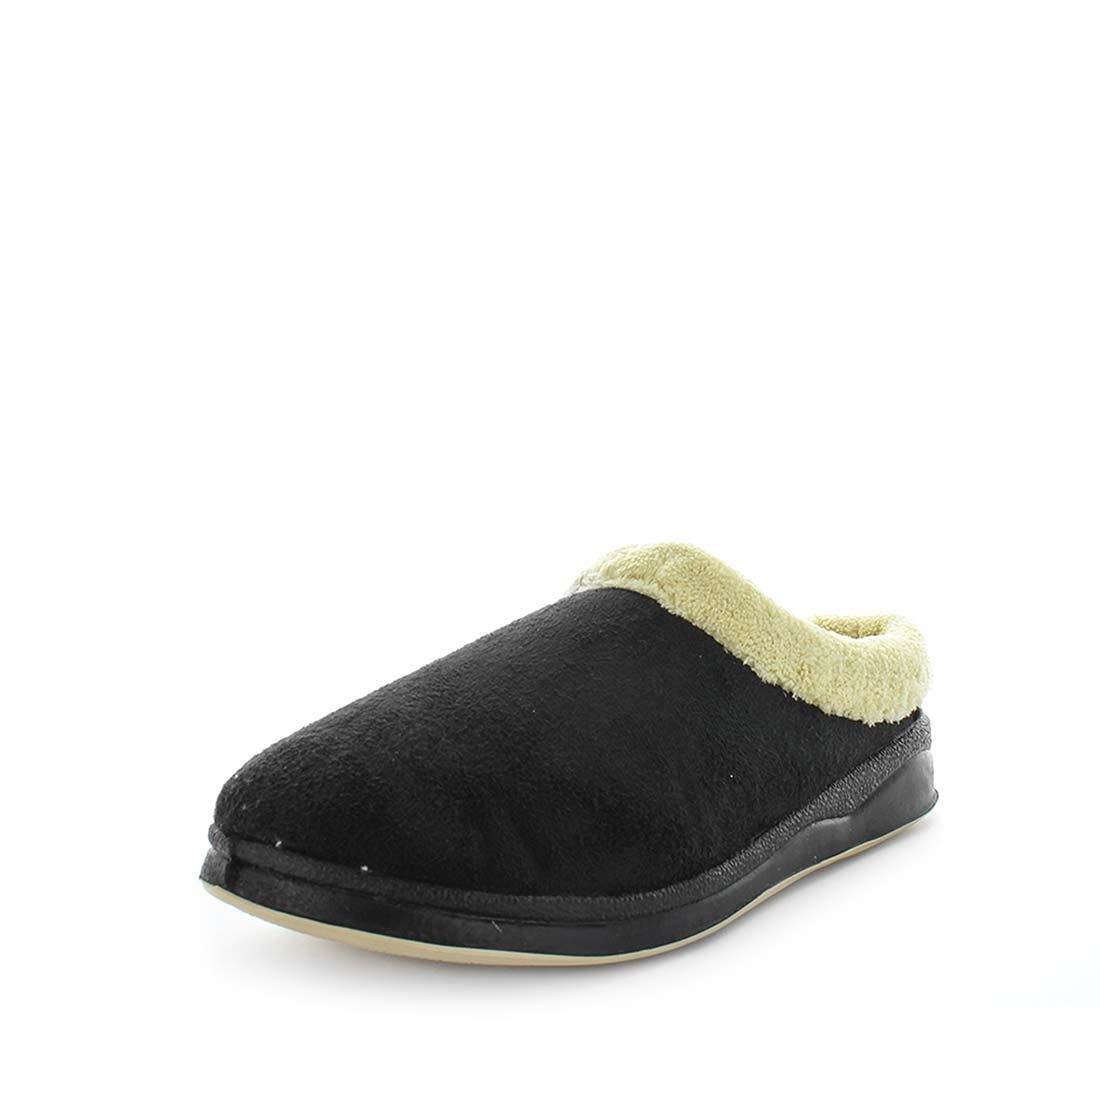 womens slippers - camel Endy slipper, by panda Slippers. A scuff style slipper with a micro-terry design for warmth and an extra comfy fit with anon slip sole.